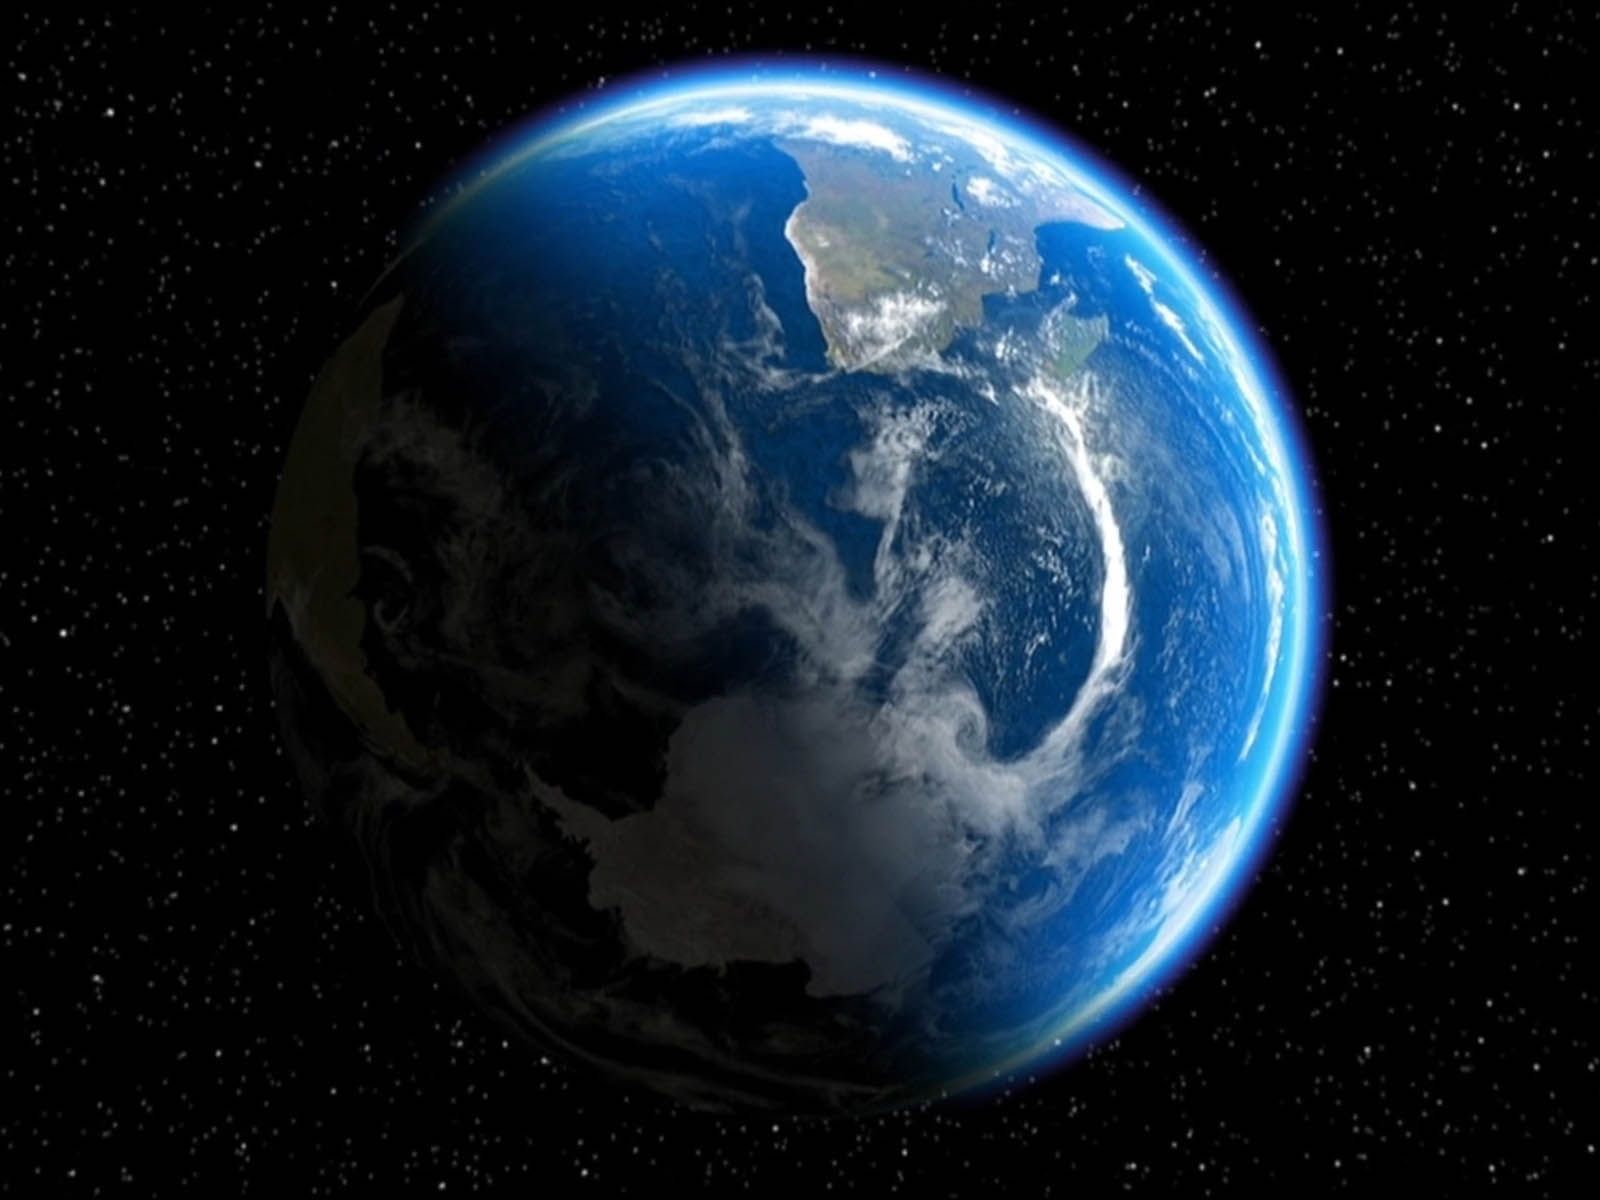 The earth is shown in space with a blue atmosphere - Earth